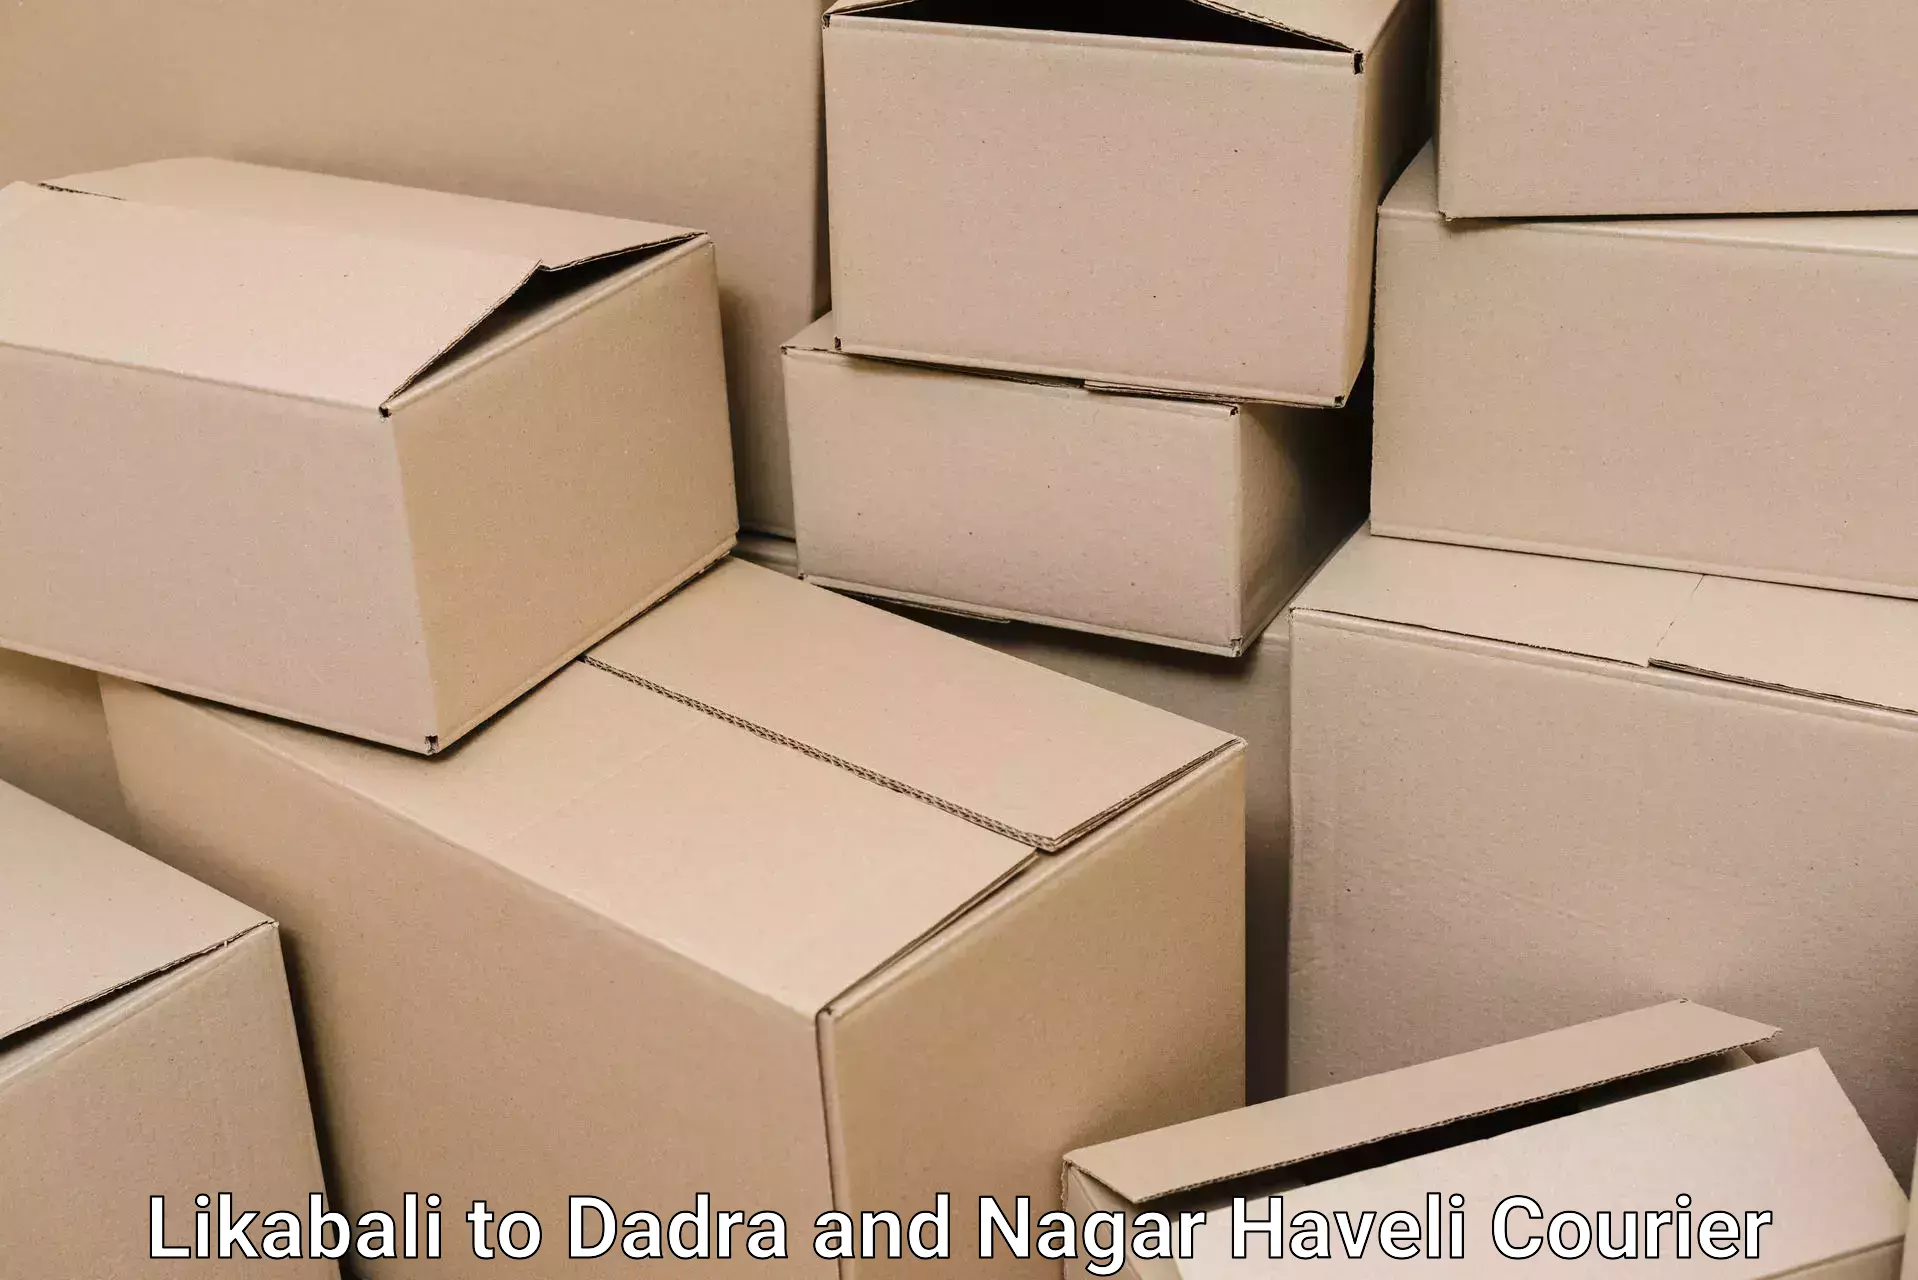 Efficient relocation services Likabali to Dadra and Nagar Haveli